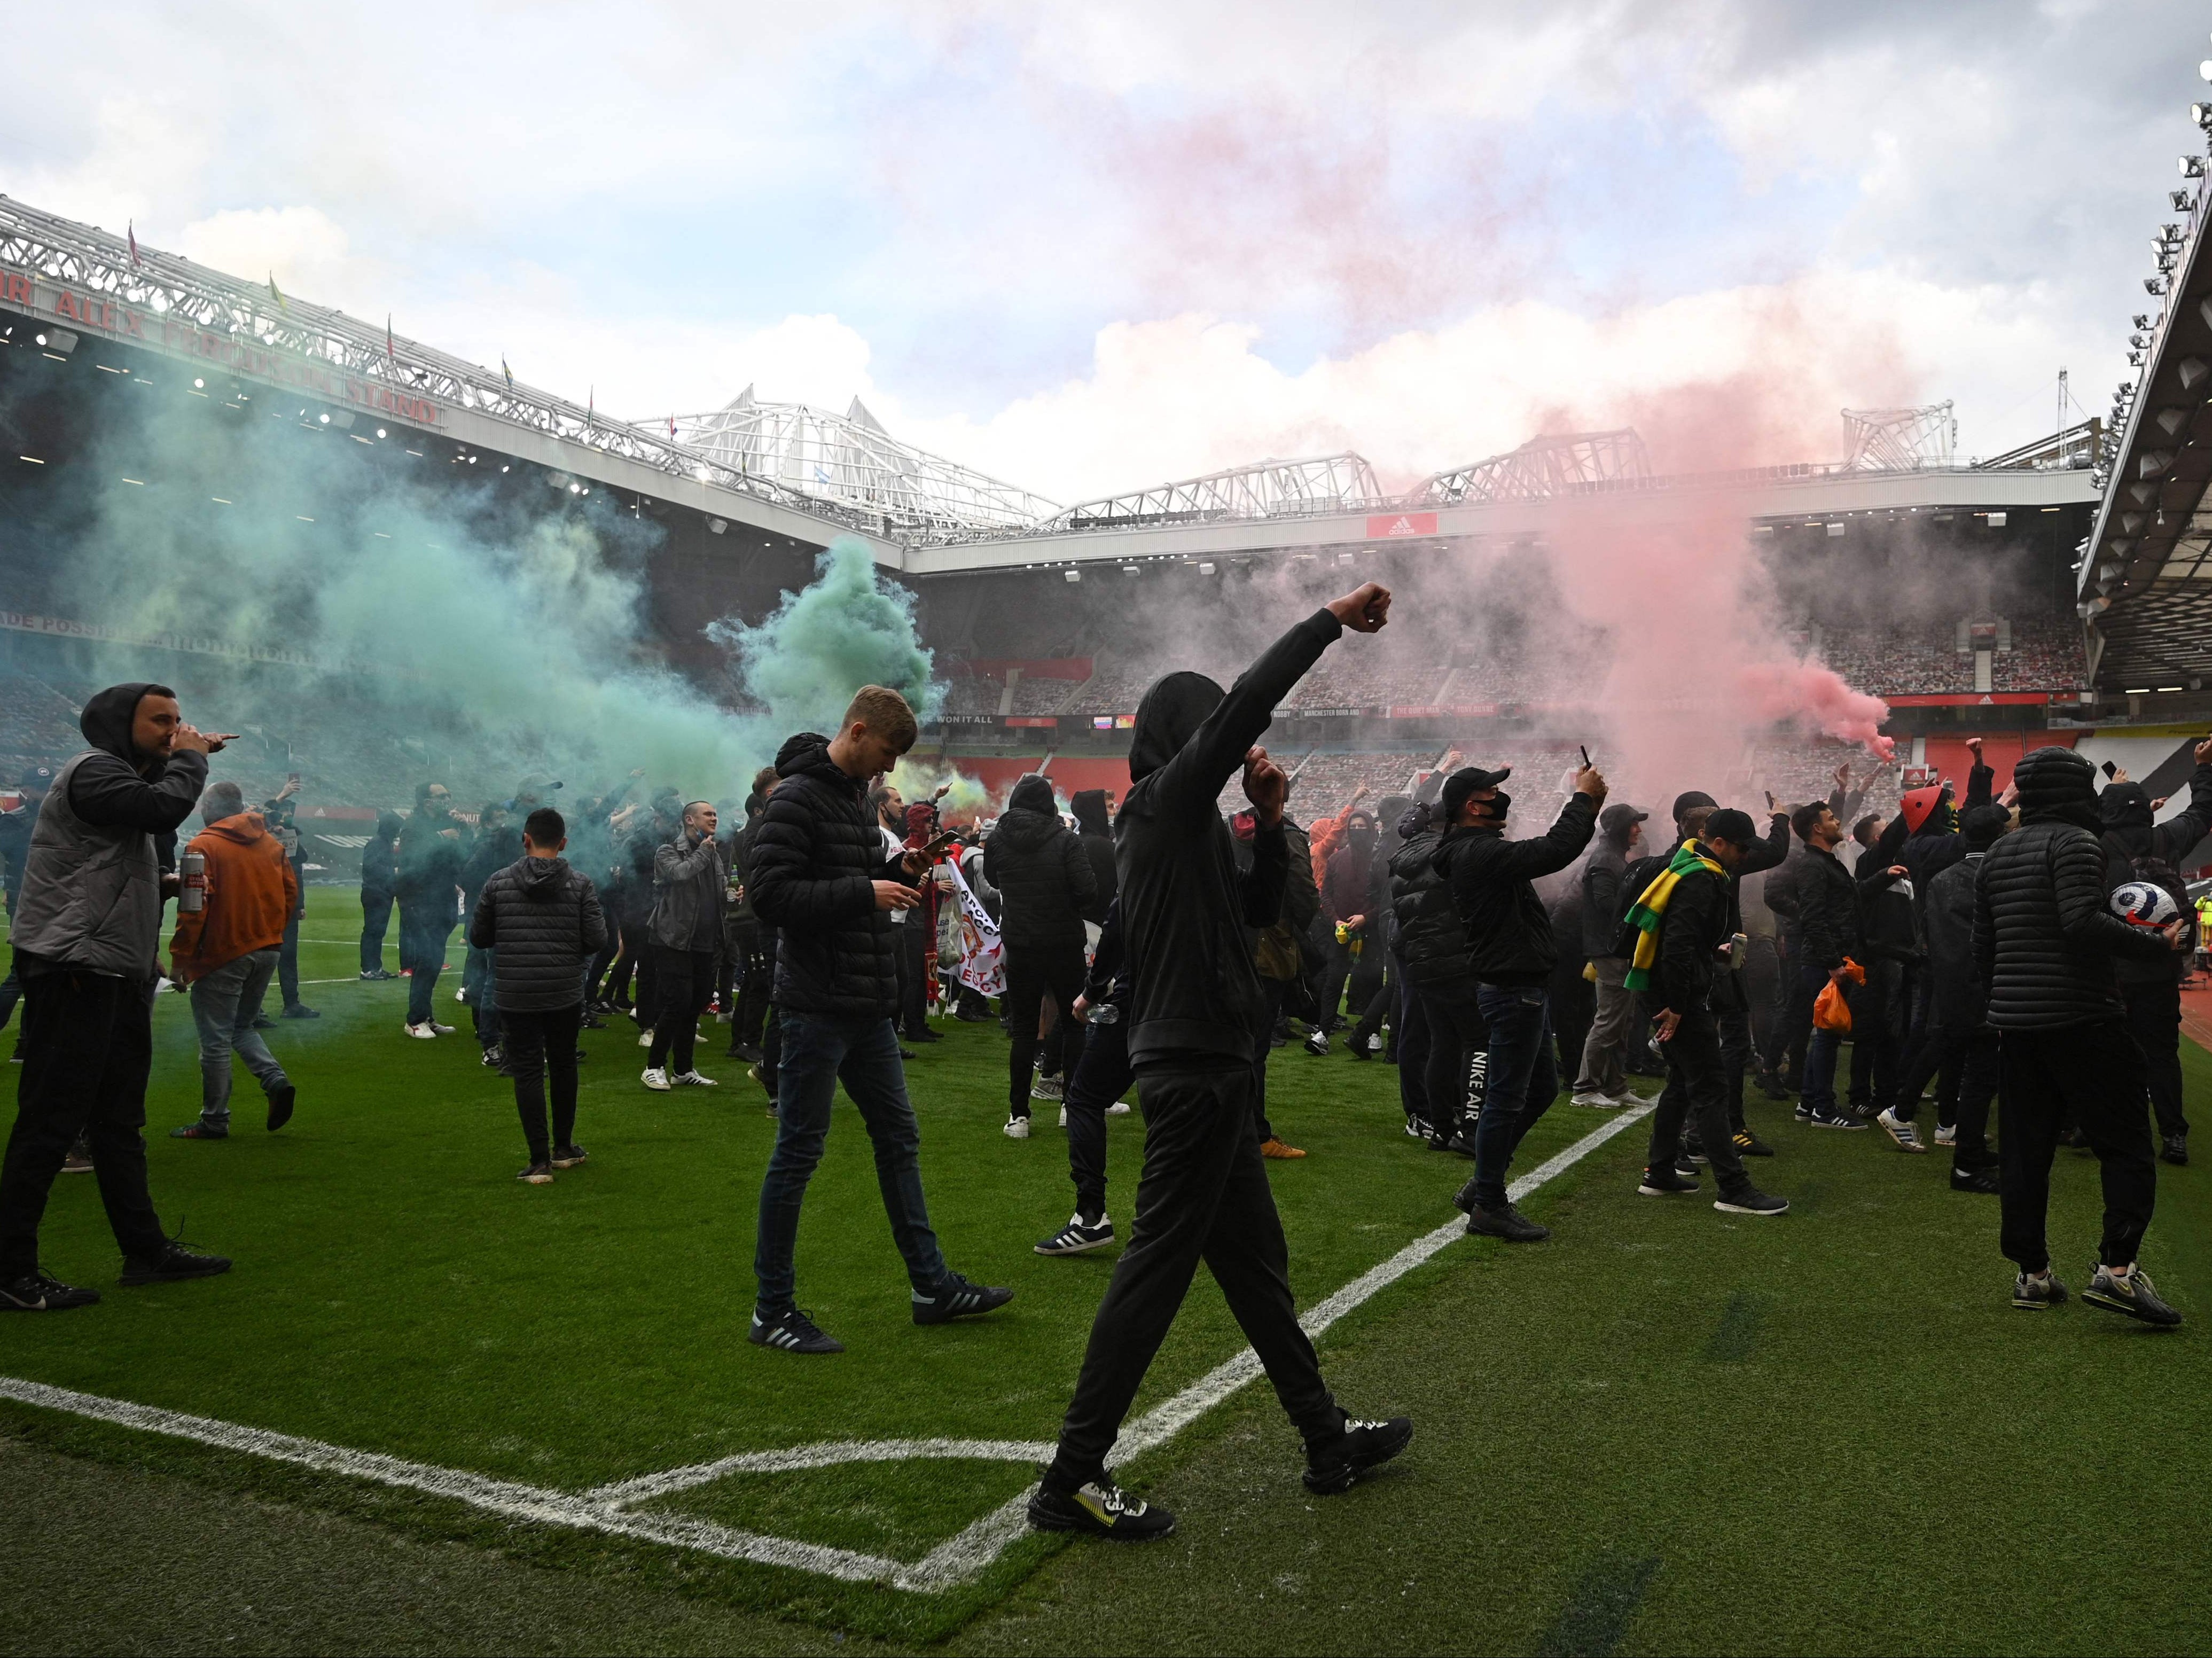 Fans set off flares on the pitch at Old Trafford before the game with Liverpool was called off